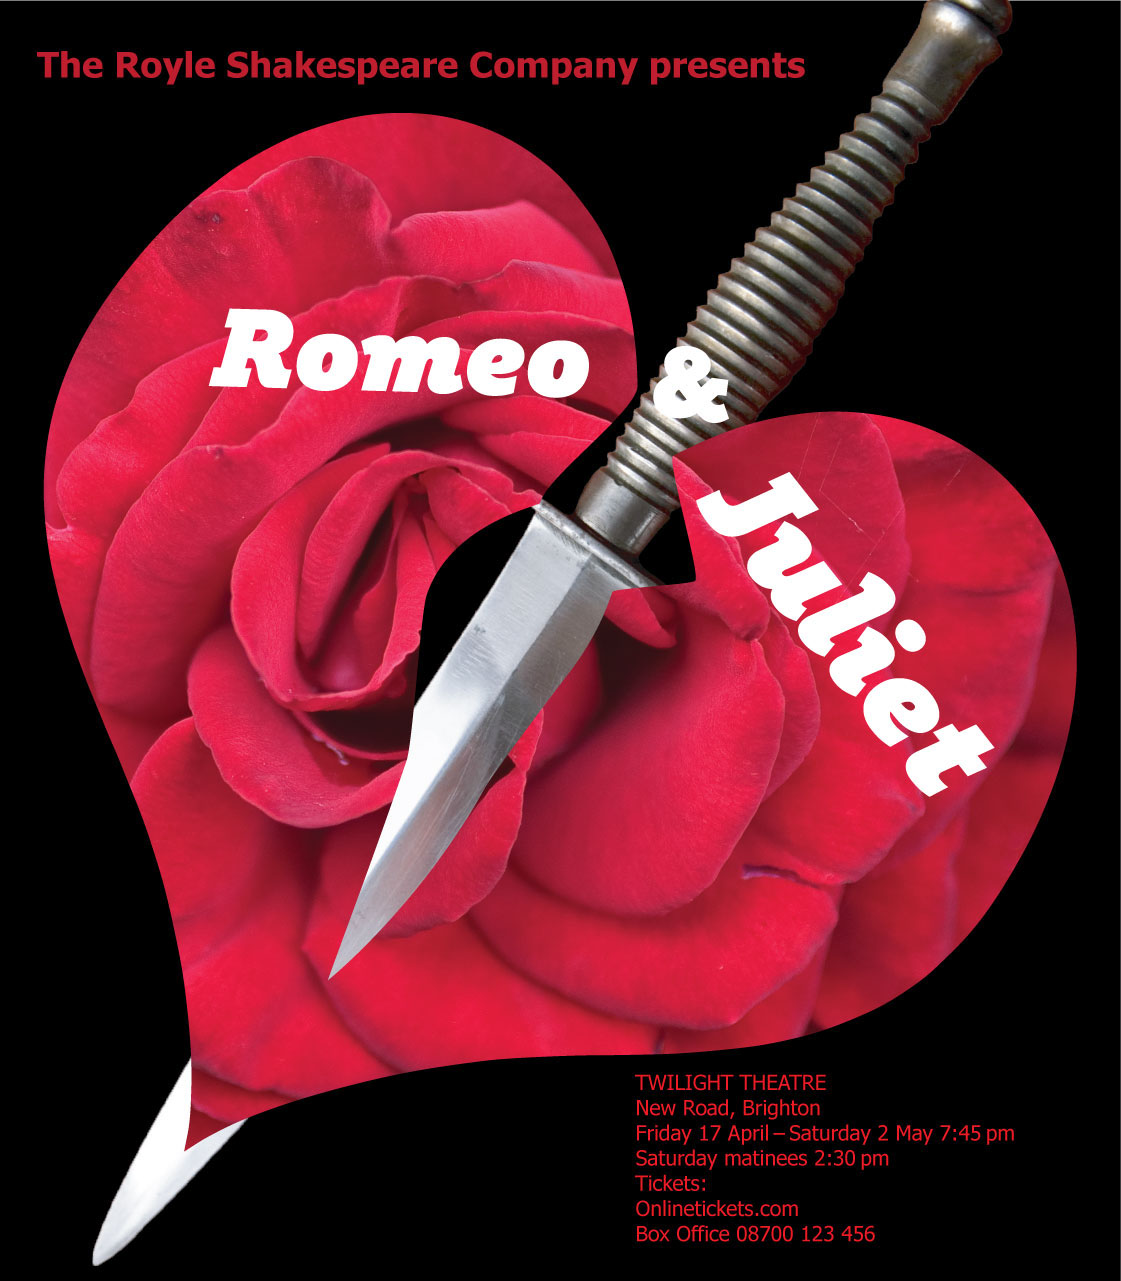 Romeo and Juliet shakespeare theater  poster Imagery dagger tornado